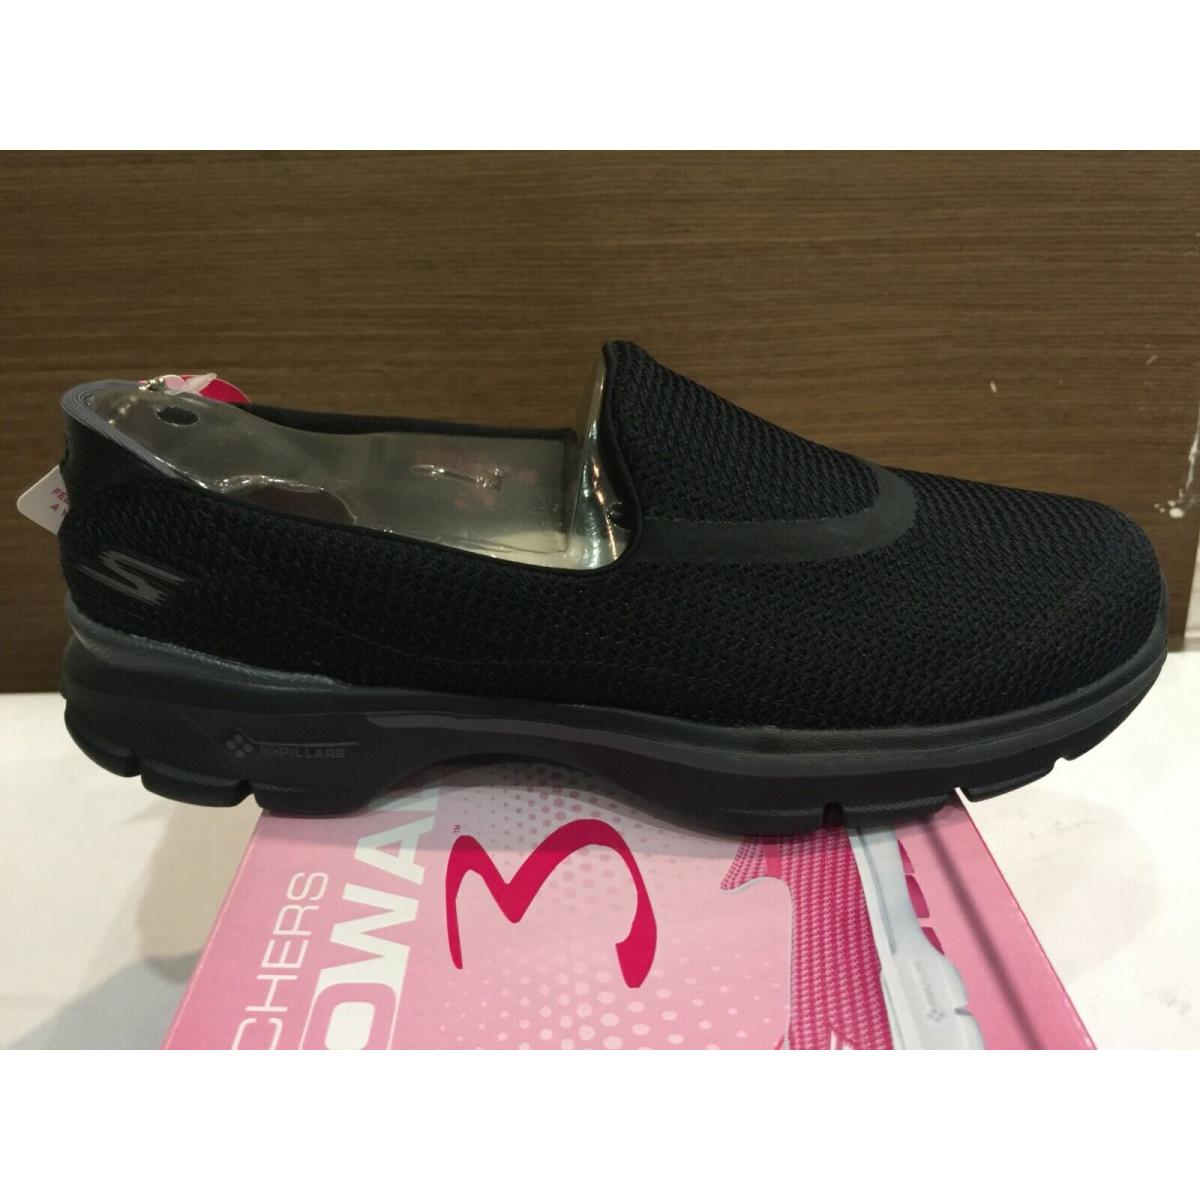 Sketchers Ladies New Slip On Casual Memory Foam Flat Trainers Shoes UK Sizes 3-7 